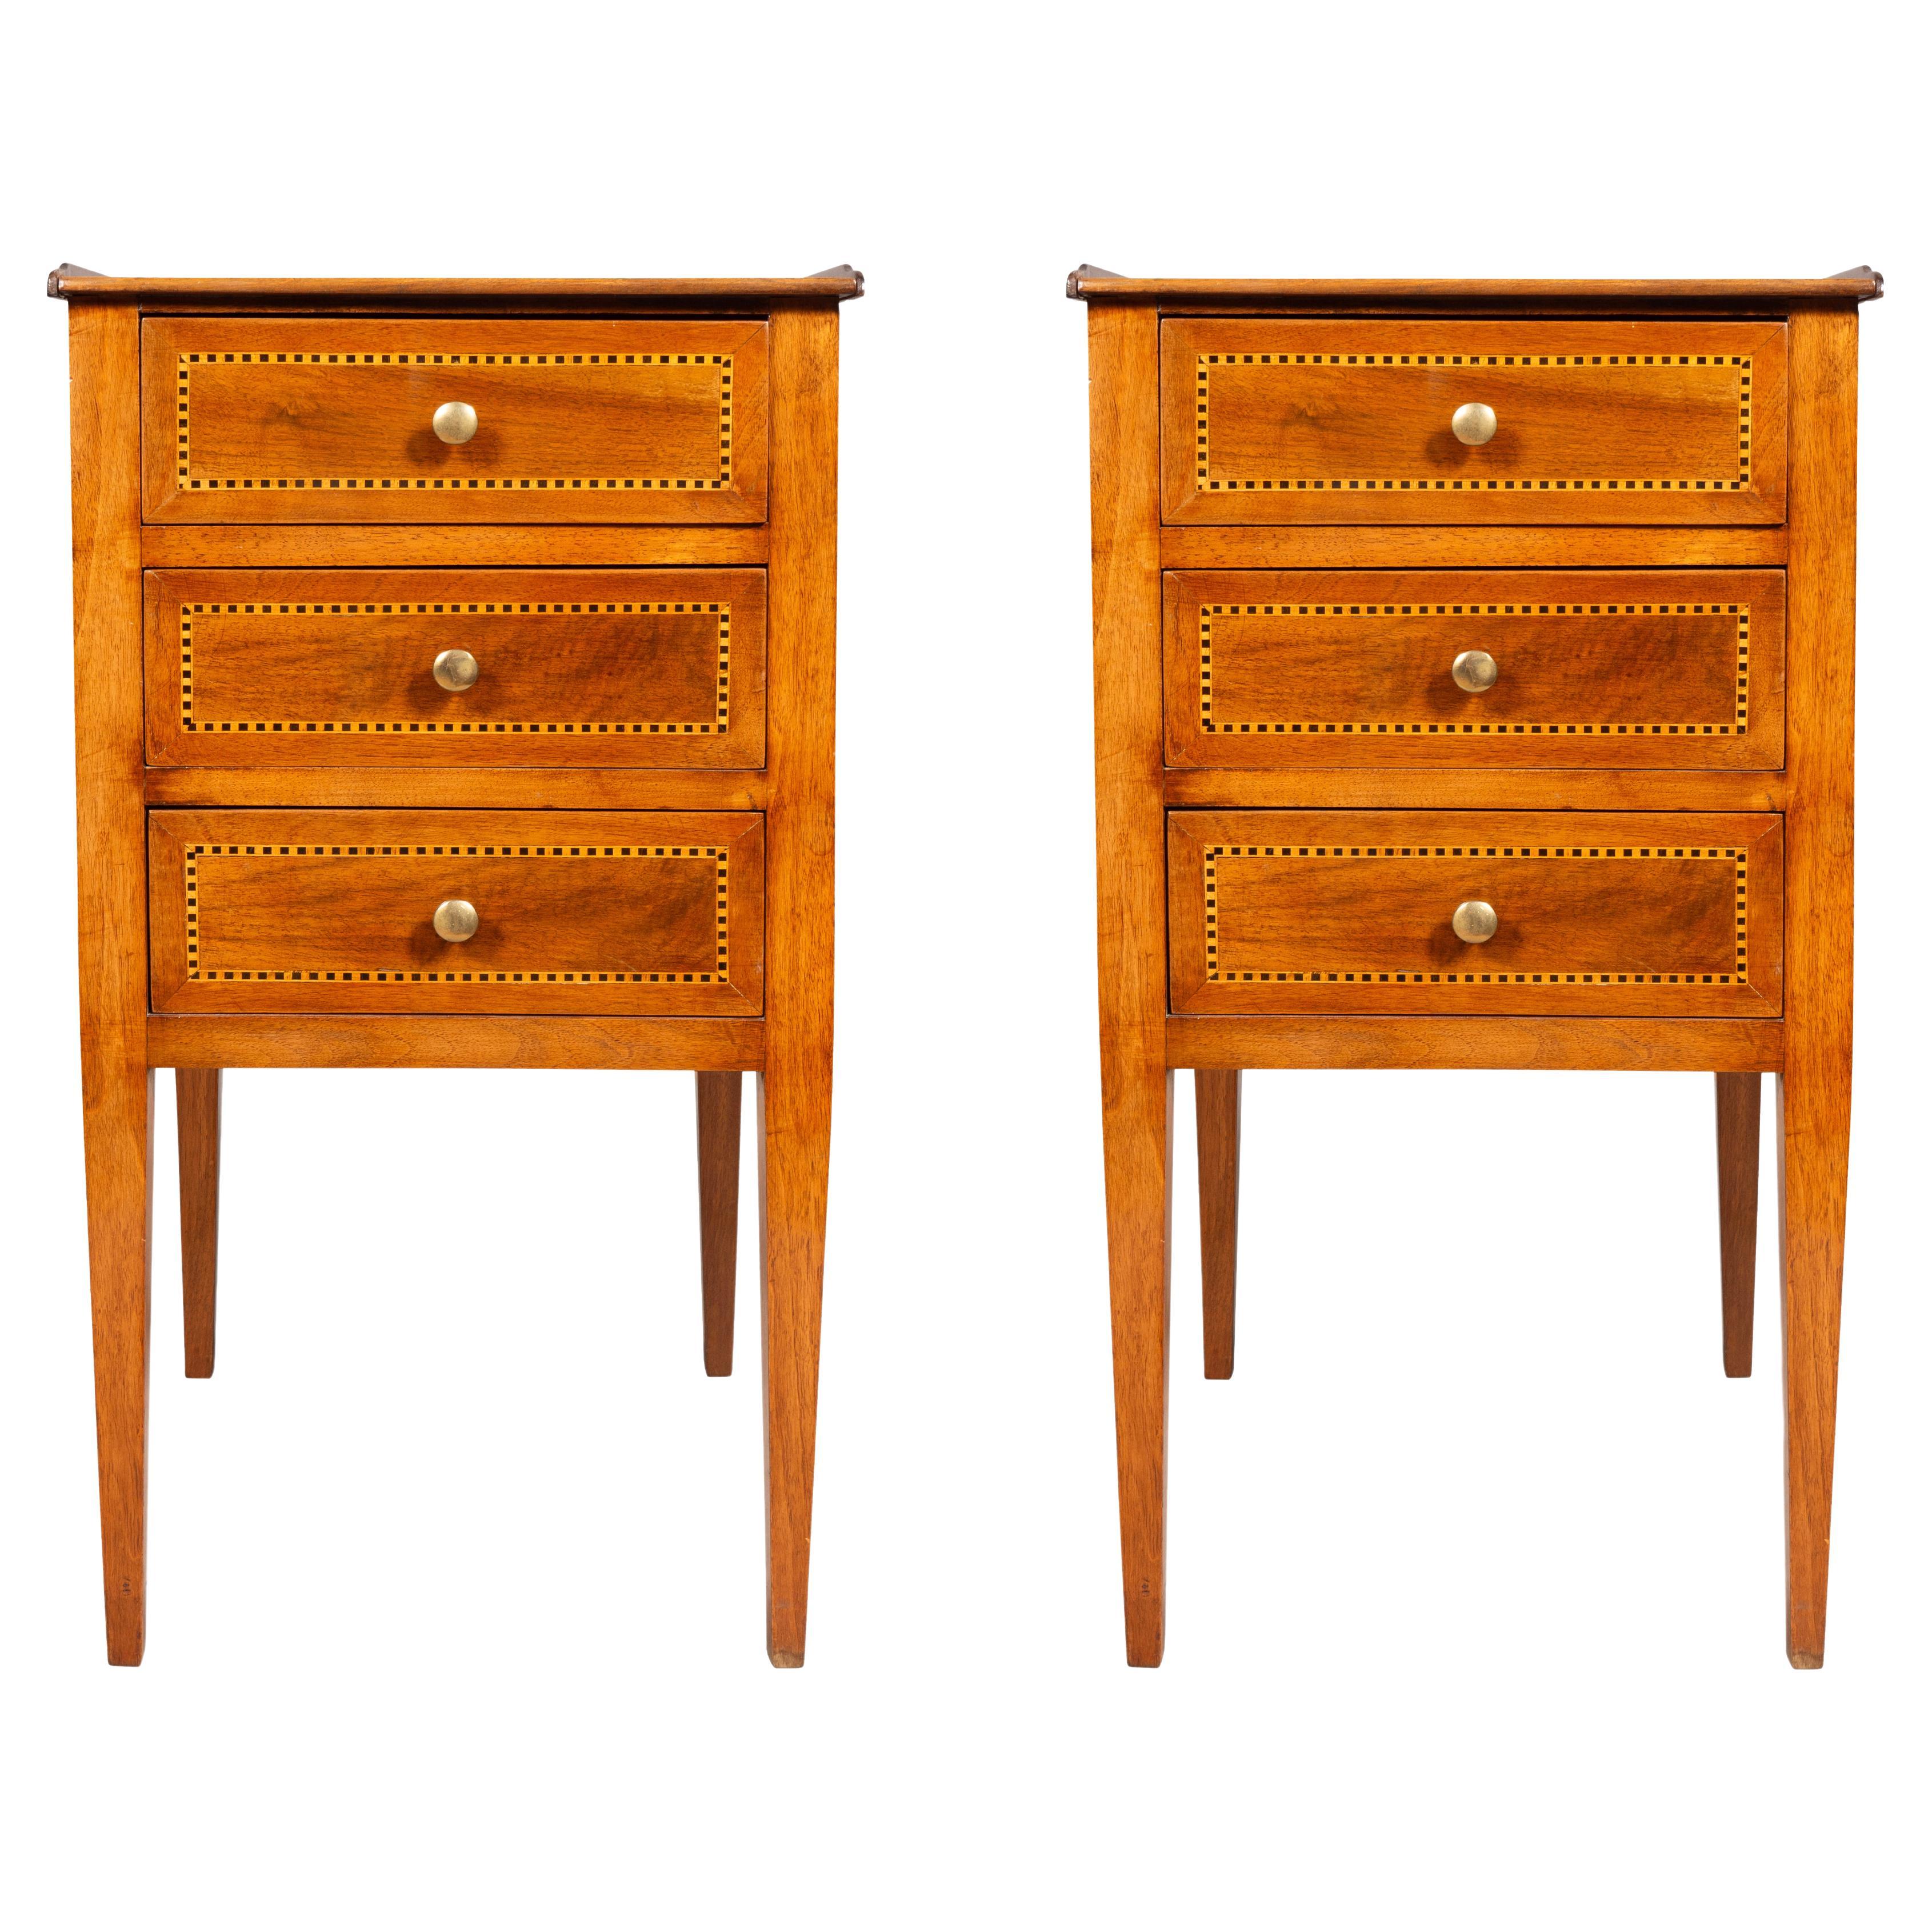 Pair Of Italian Neoclassic Style Walnut Side Tables For Sale